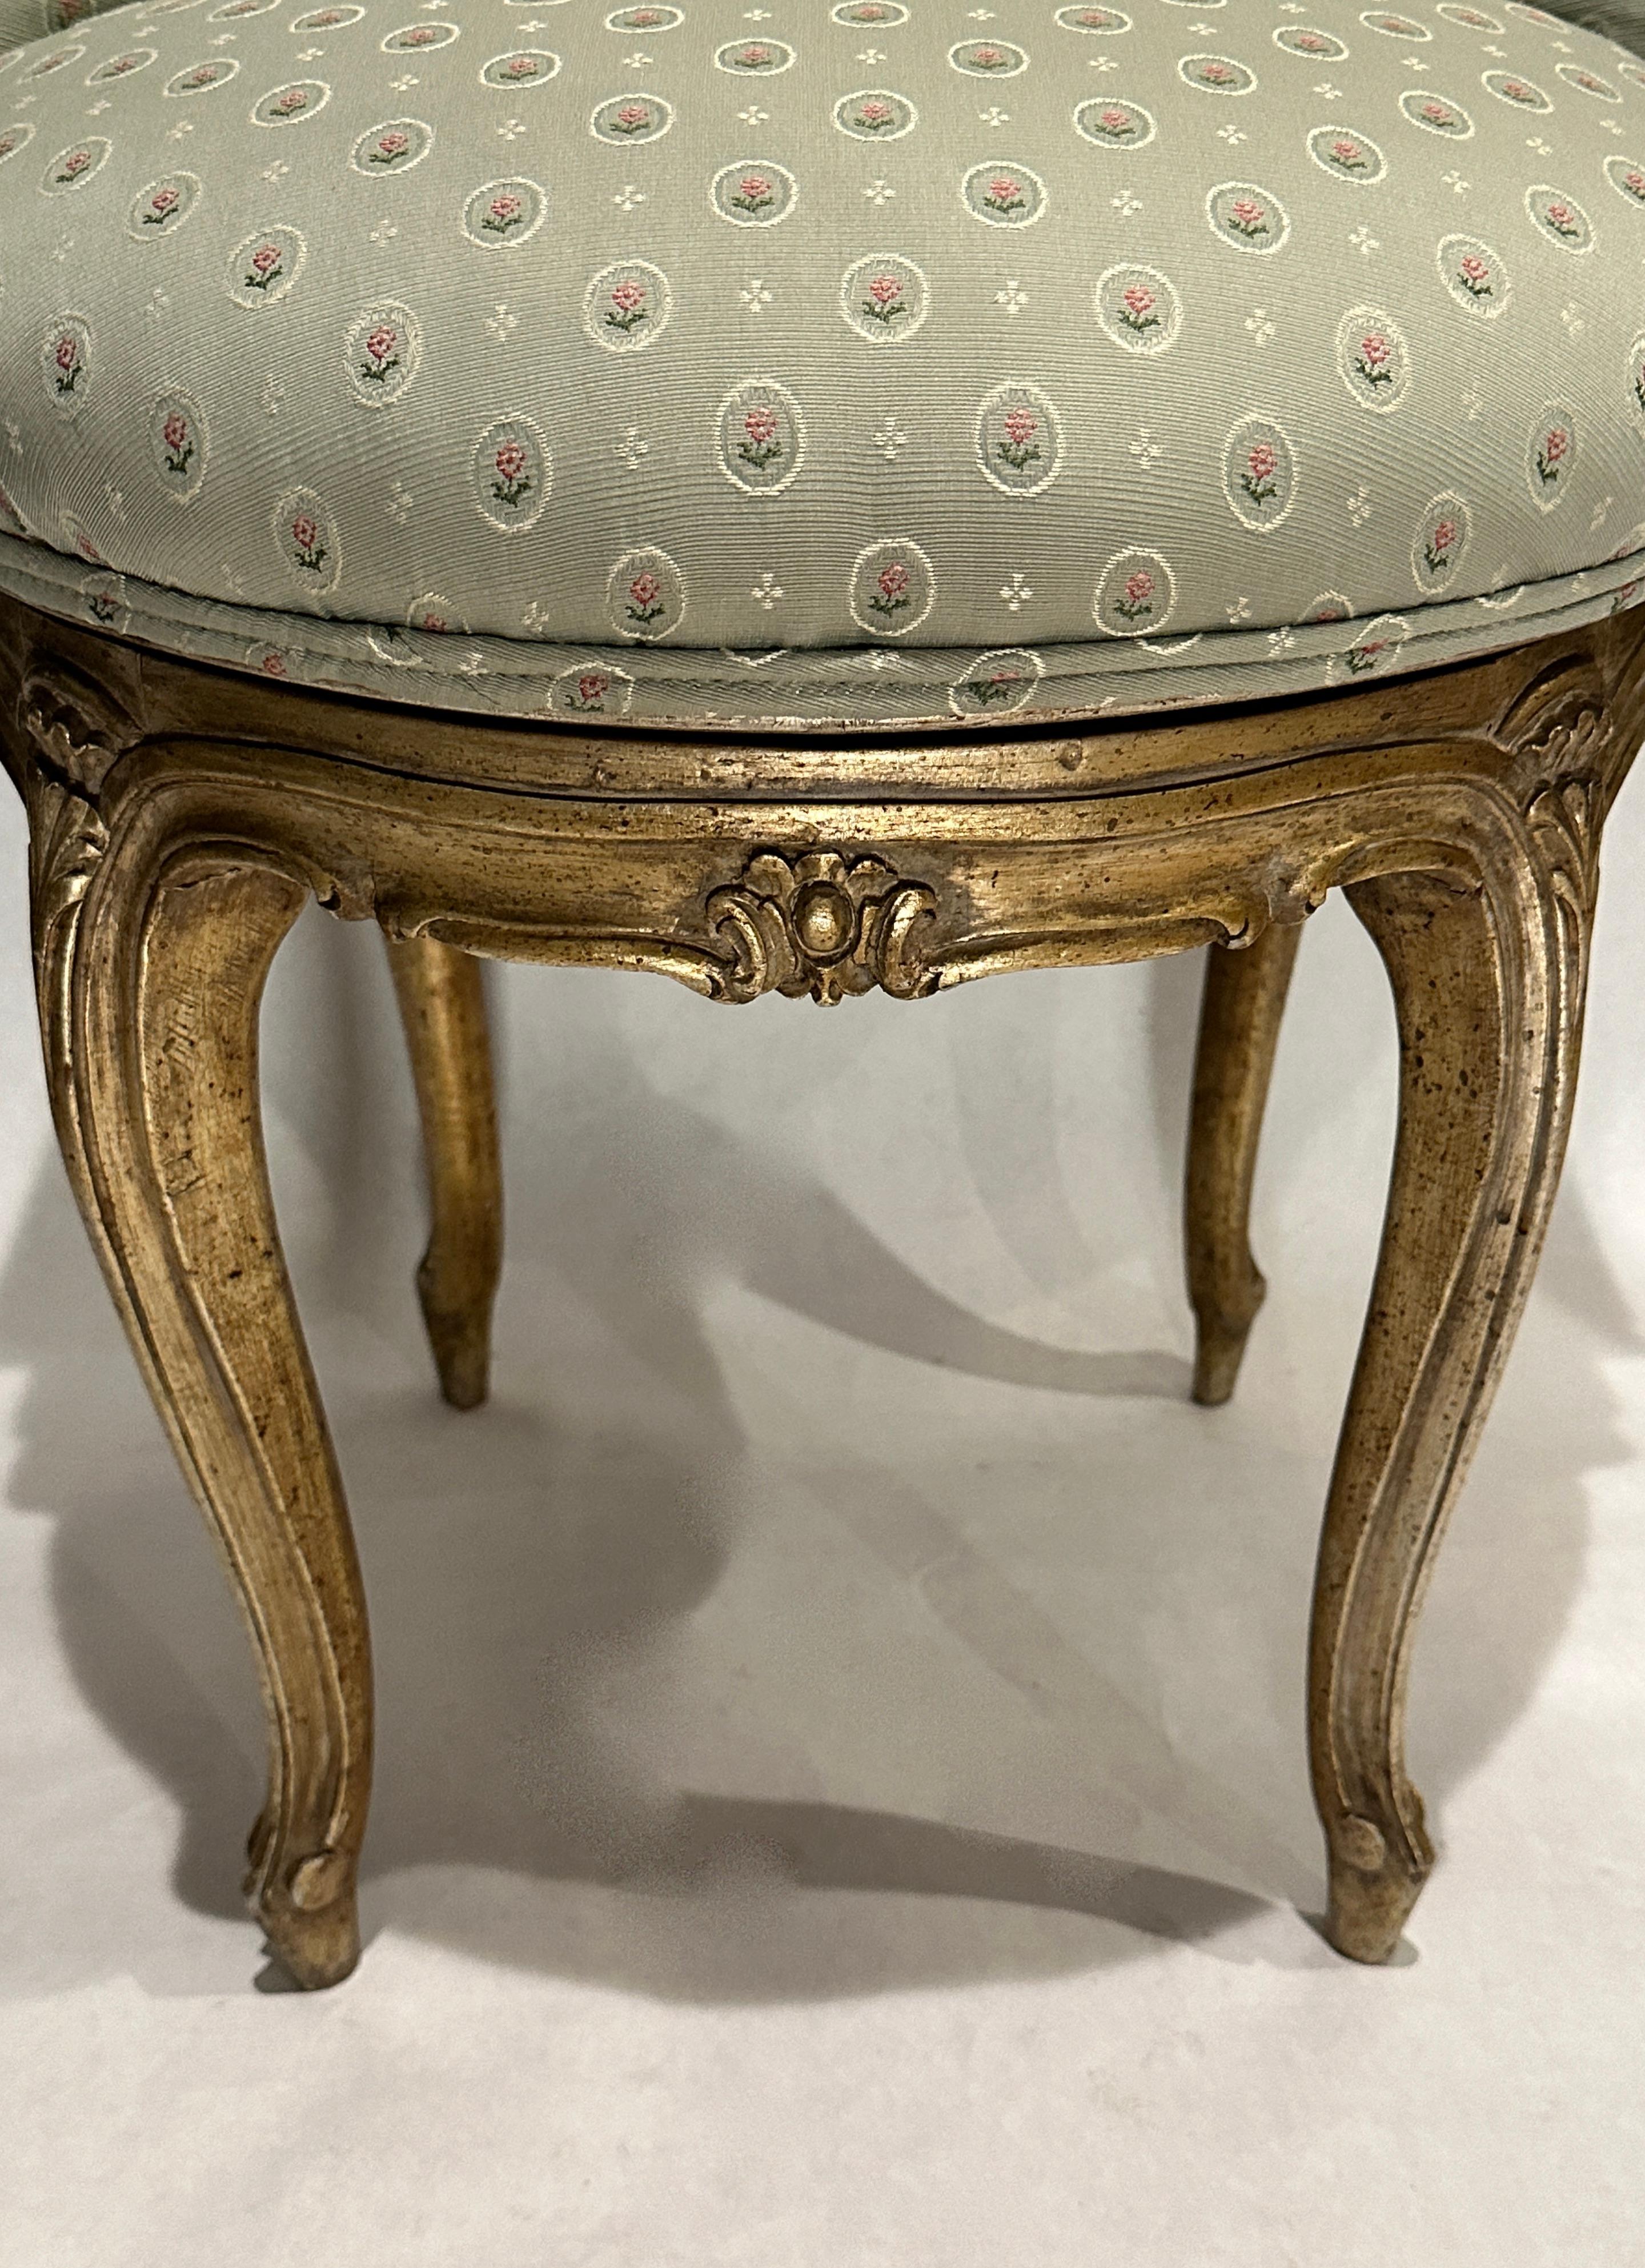 Louis XV style carved wood and silver gilt swivel low chair. Silver gilt with darker antique finish shading. The back of the chair sweeps around the sides creating shallow arms.